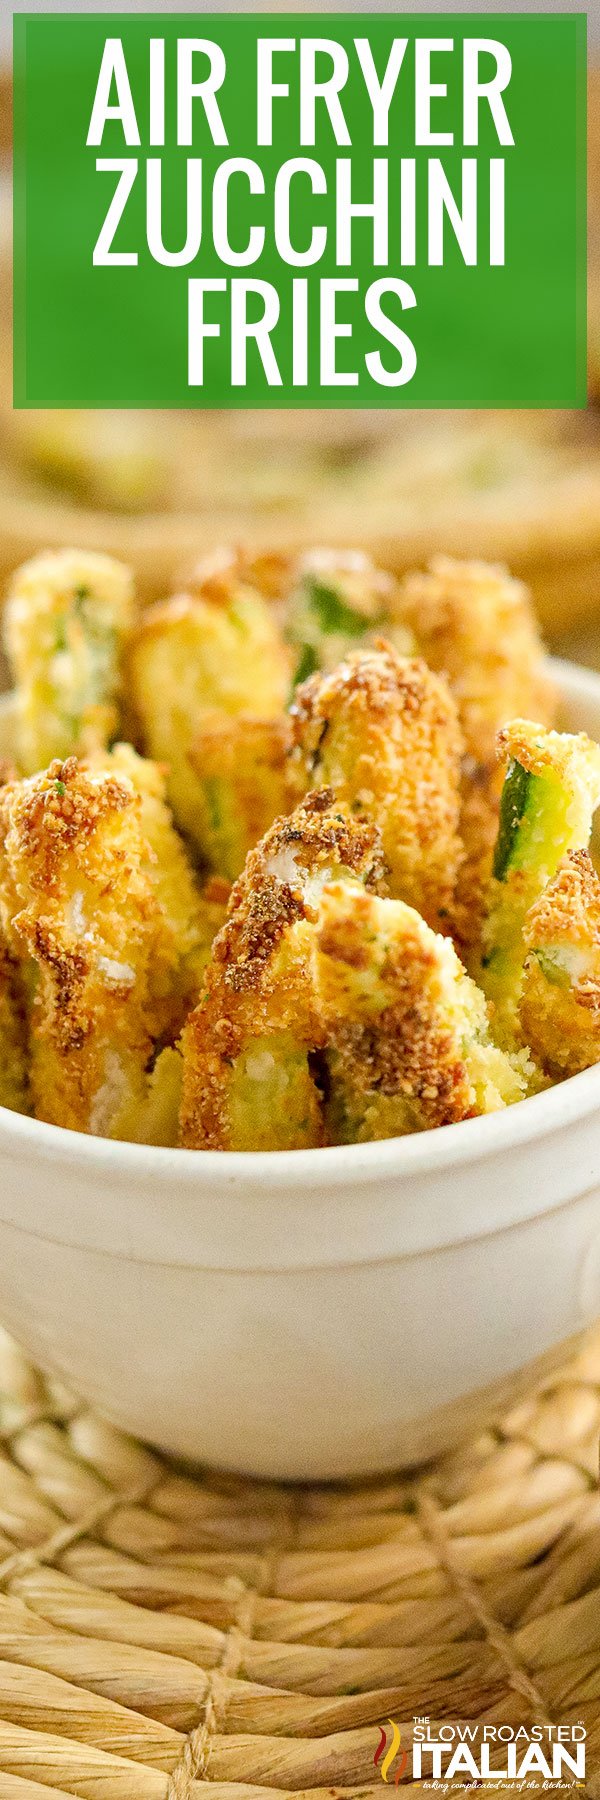 titled image (and shown): air fryer zucchini fries in white bowl